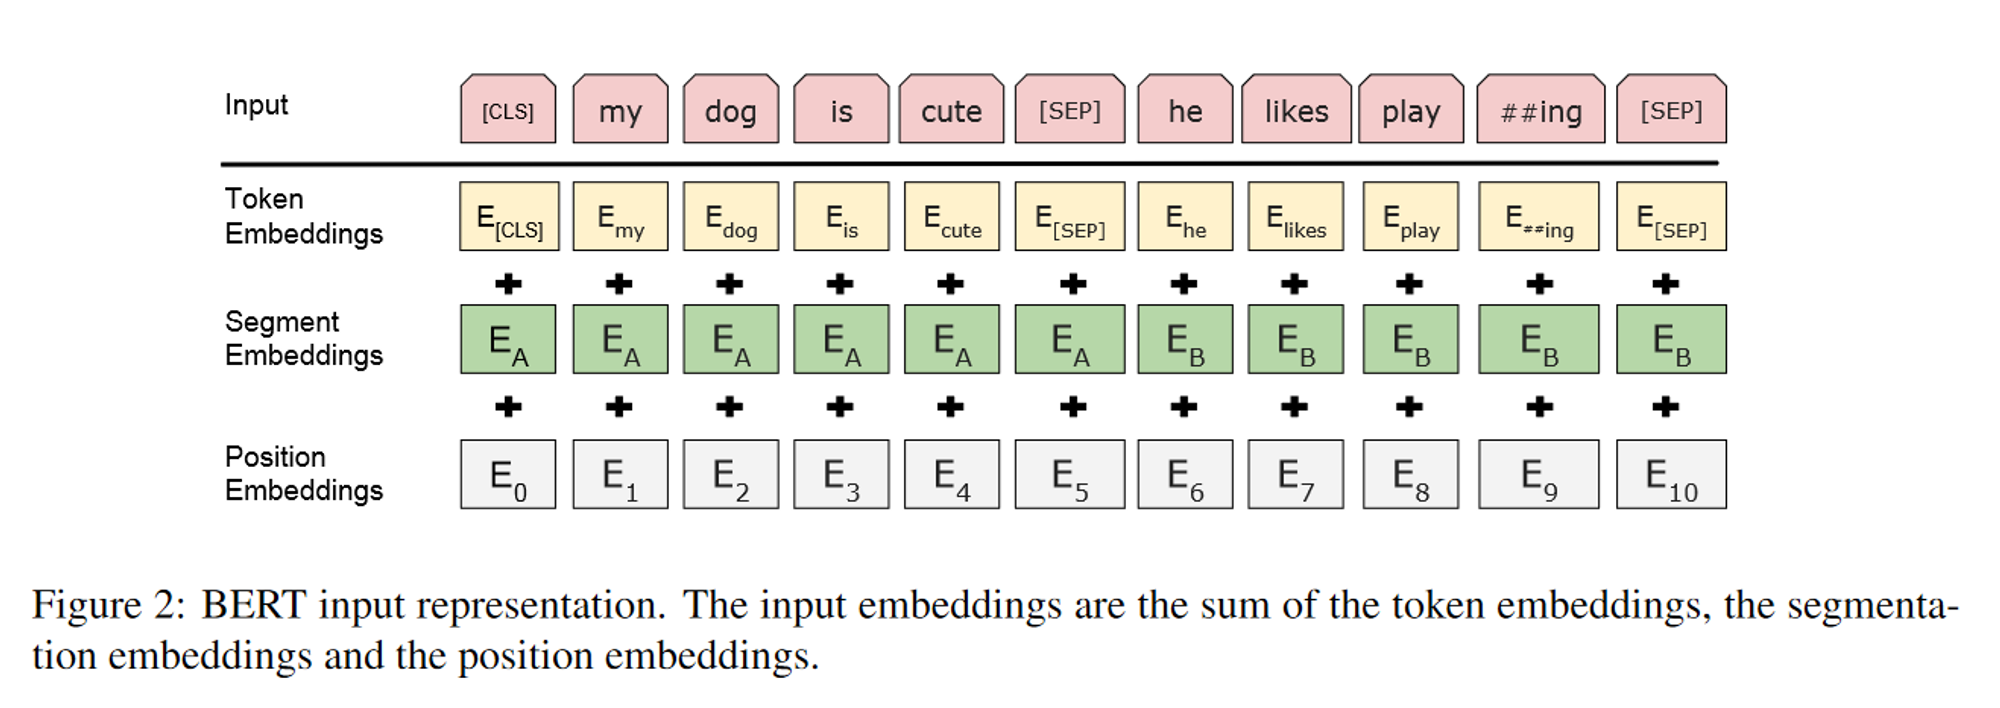 Not clear what segment embeddings are specifically - I'm guessing either this is the think that indicates which sentence a token belongs to, or just a coarser-grain of token embeddings.